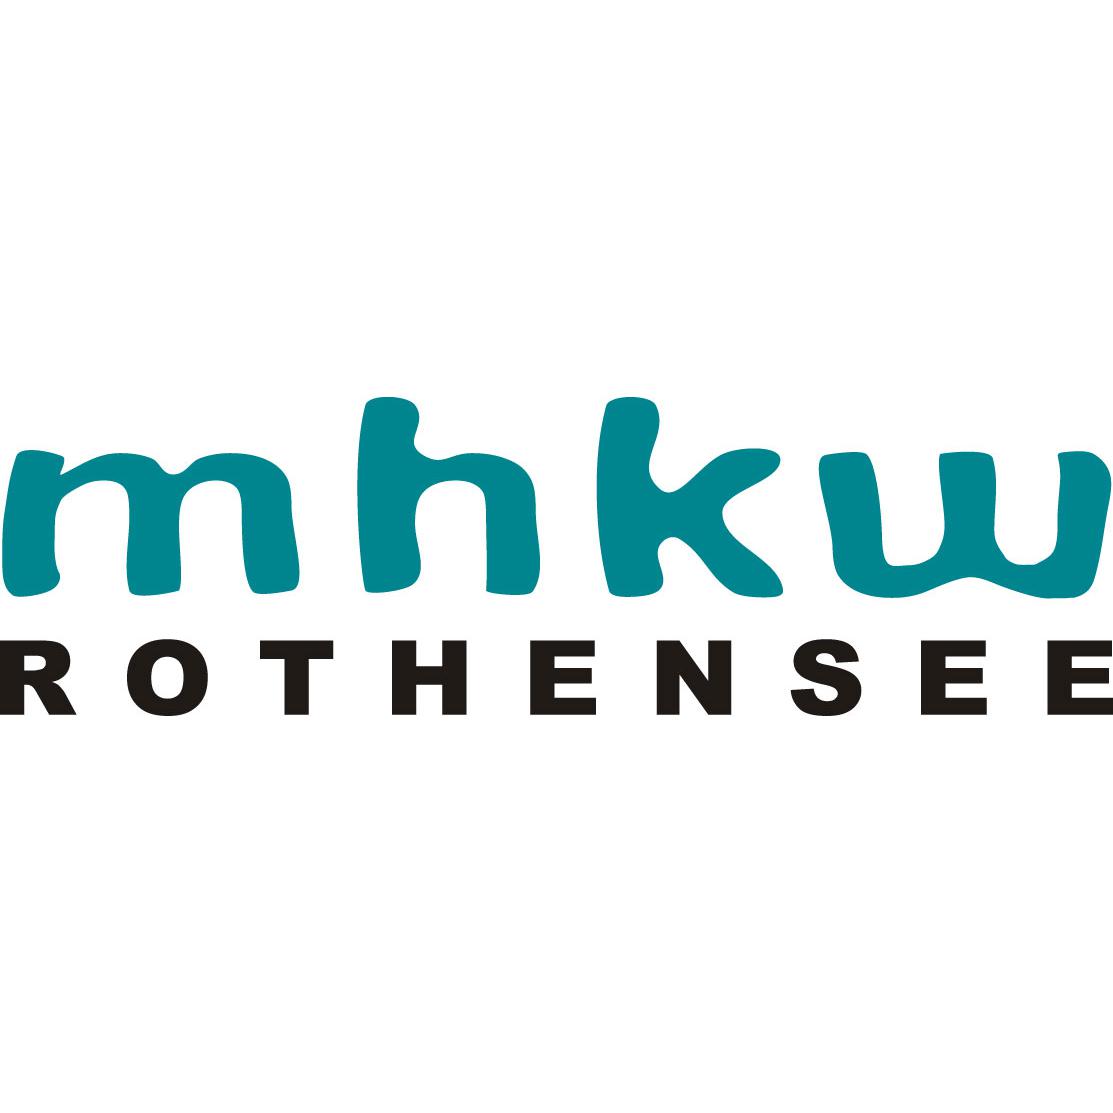 MHKW Rothensee GmbH in Magdeburg